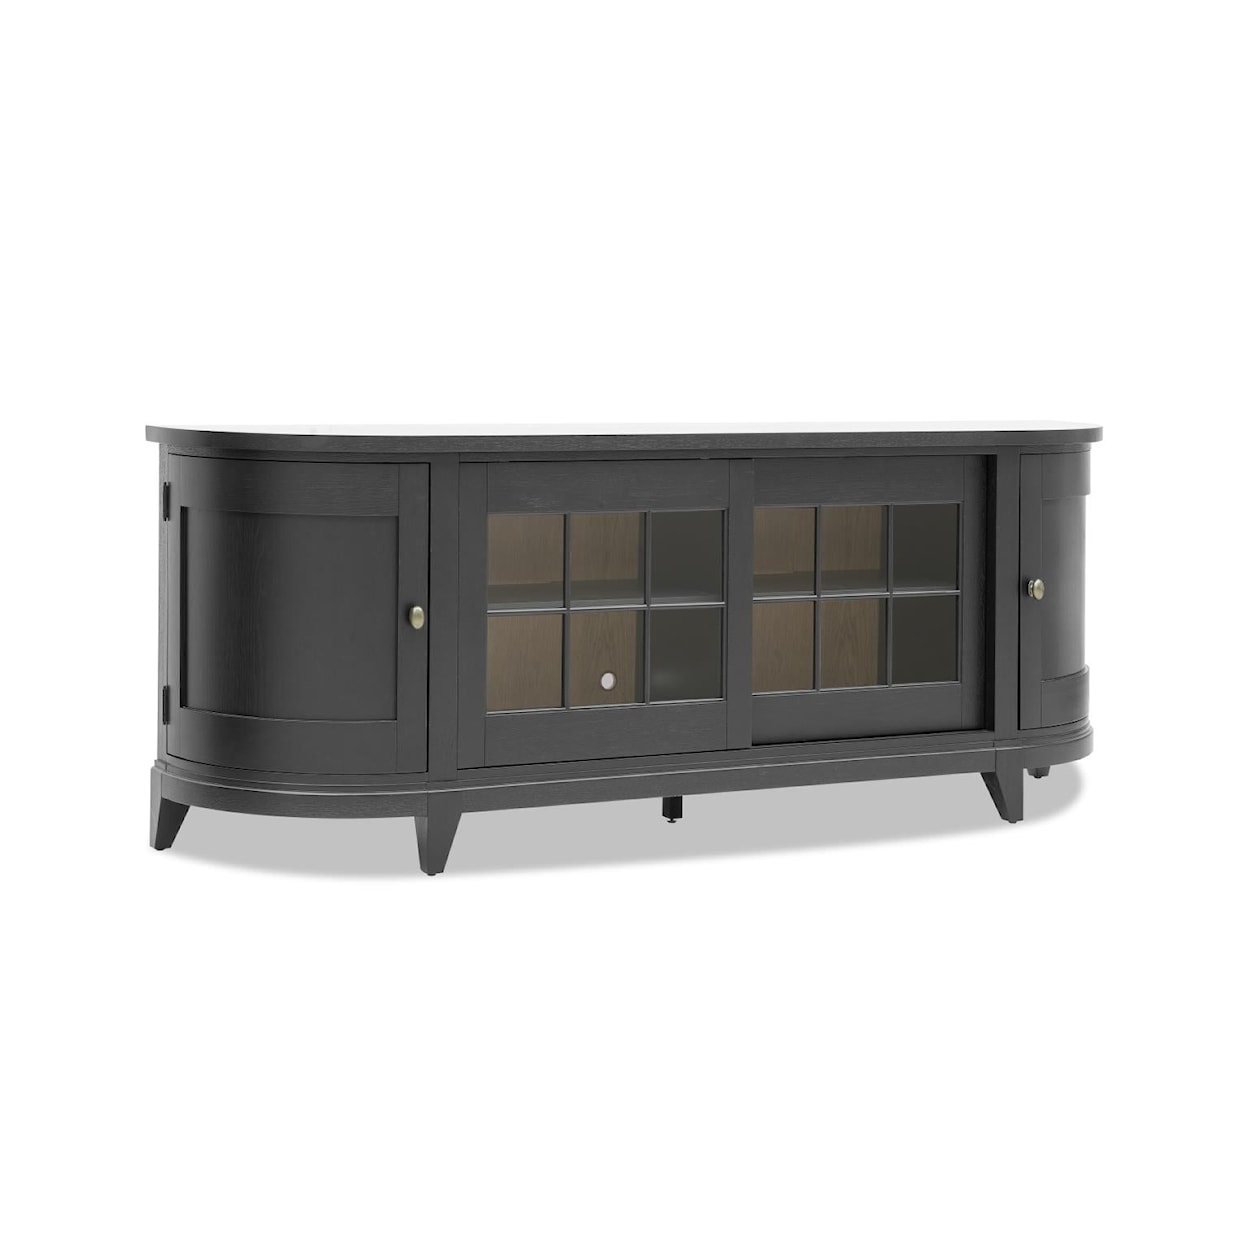 Trisha Yearwood Home Collection by Legacy Classic Today's Traditions Entertainment Console